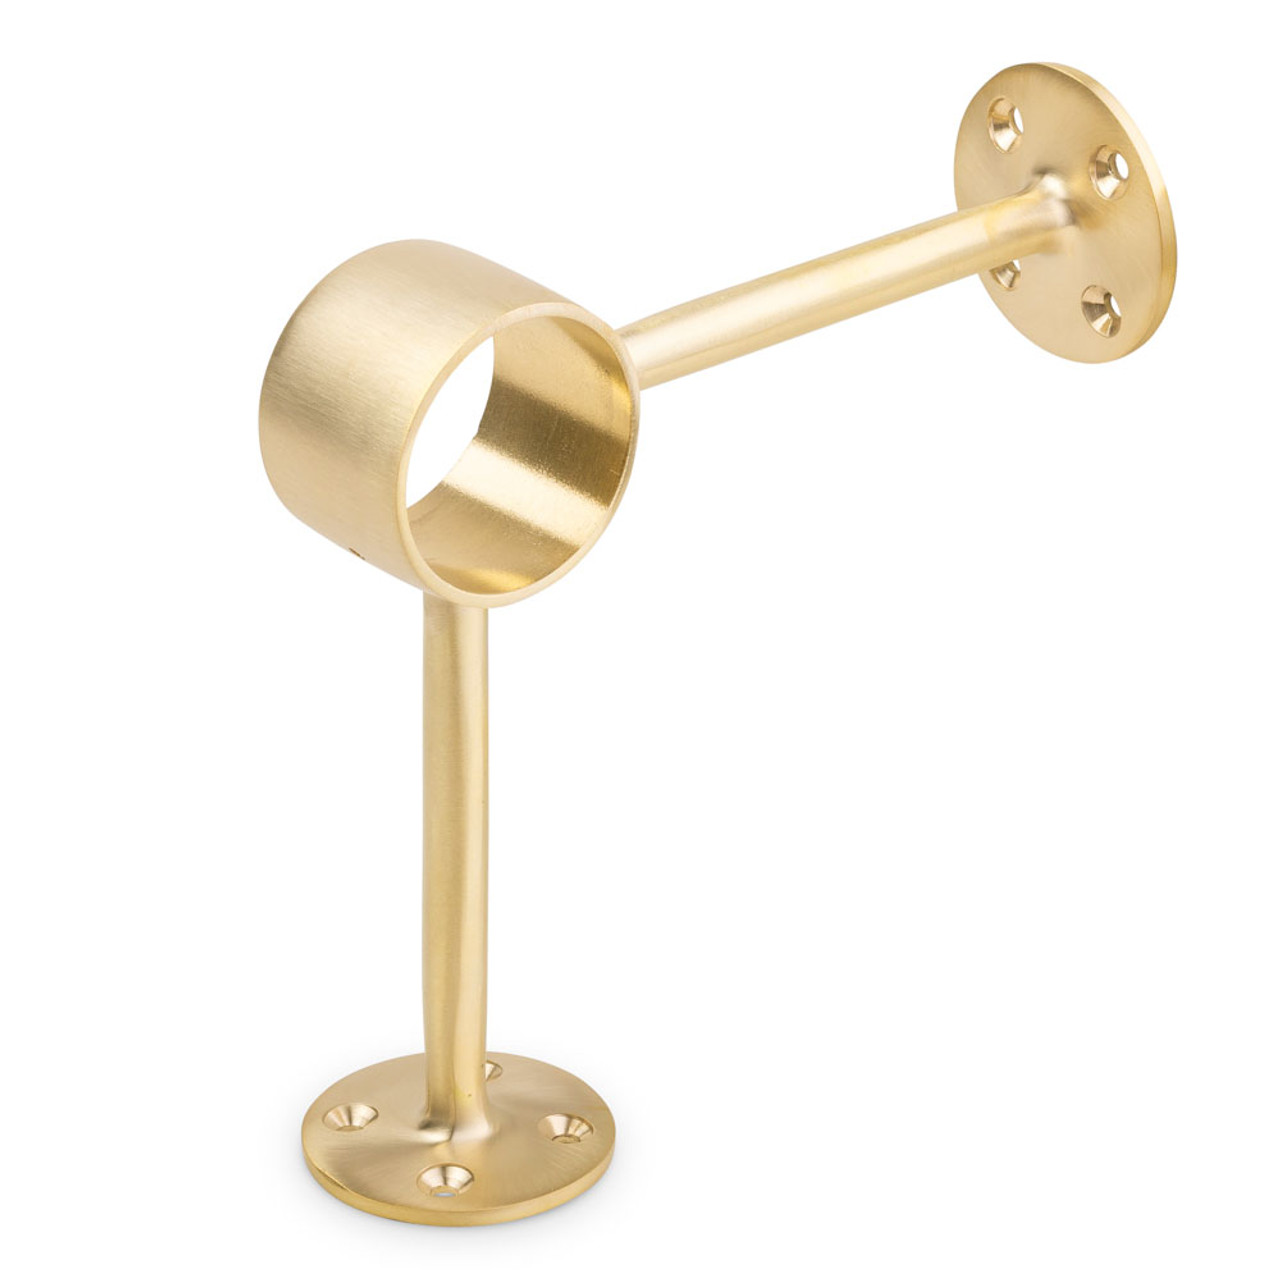 Bloom Wall Mixer Brushed Brass, Architectural Designer Products